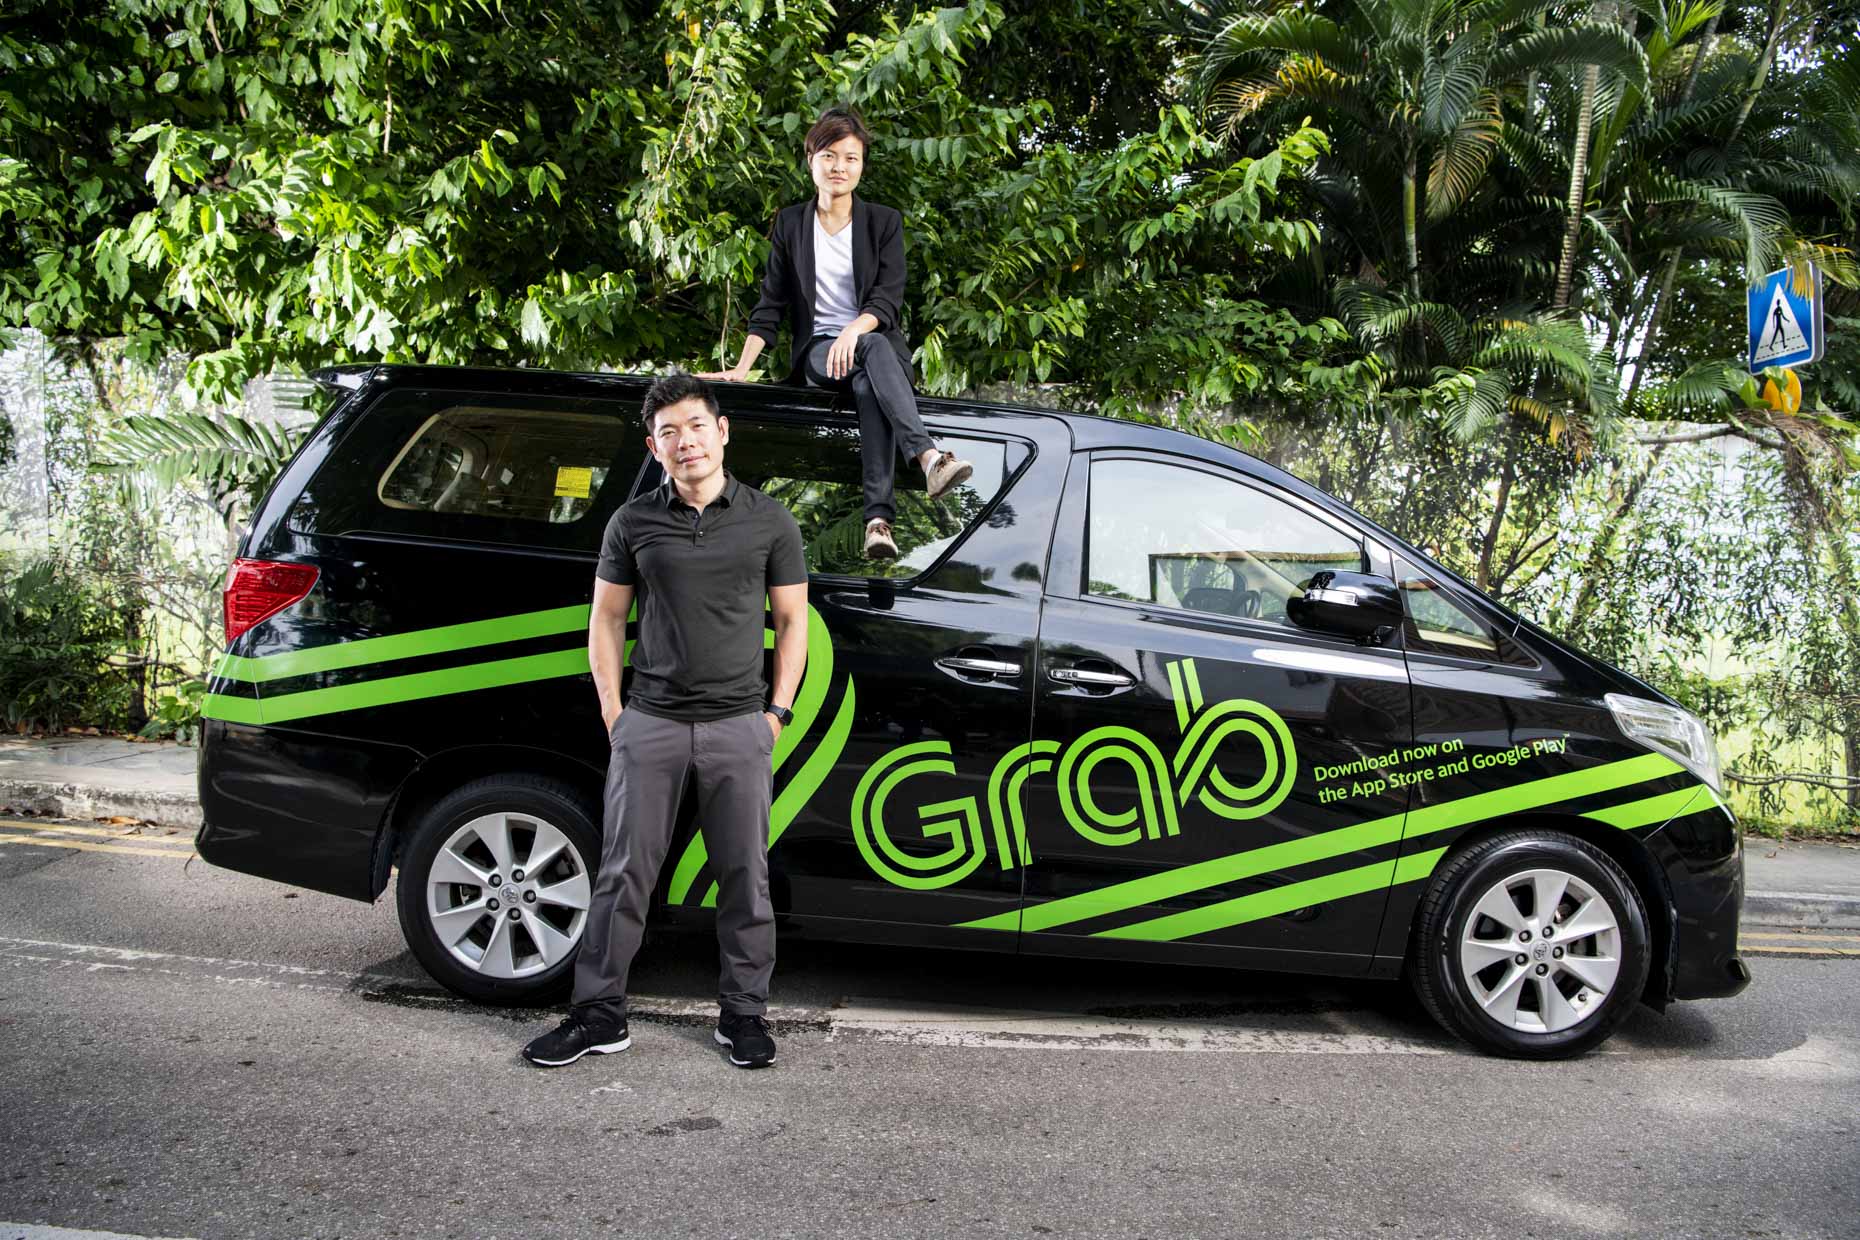 Grab Founders Anthony Tan and Tan Hooi Ling photographed in Singapore